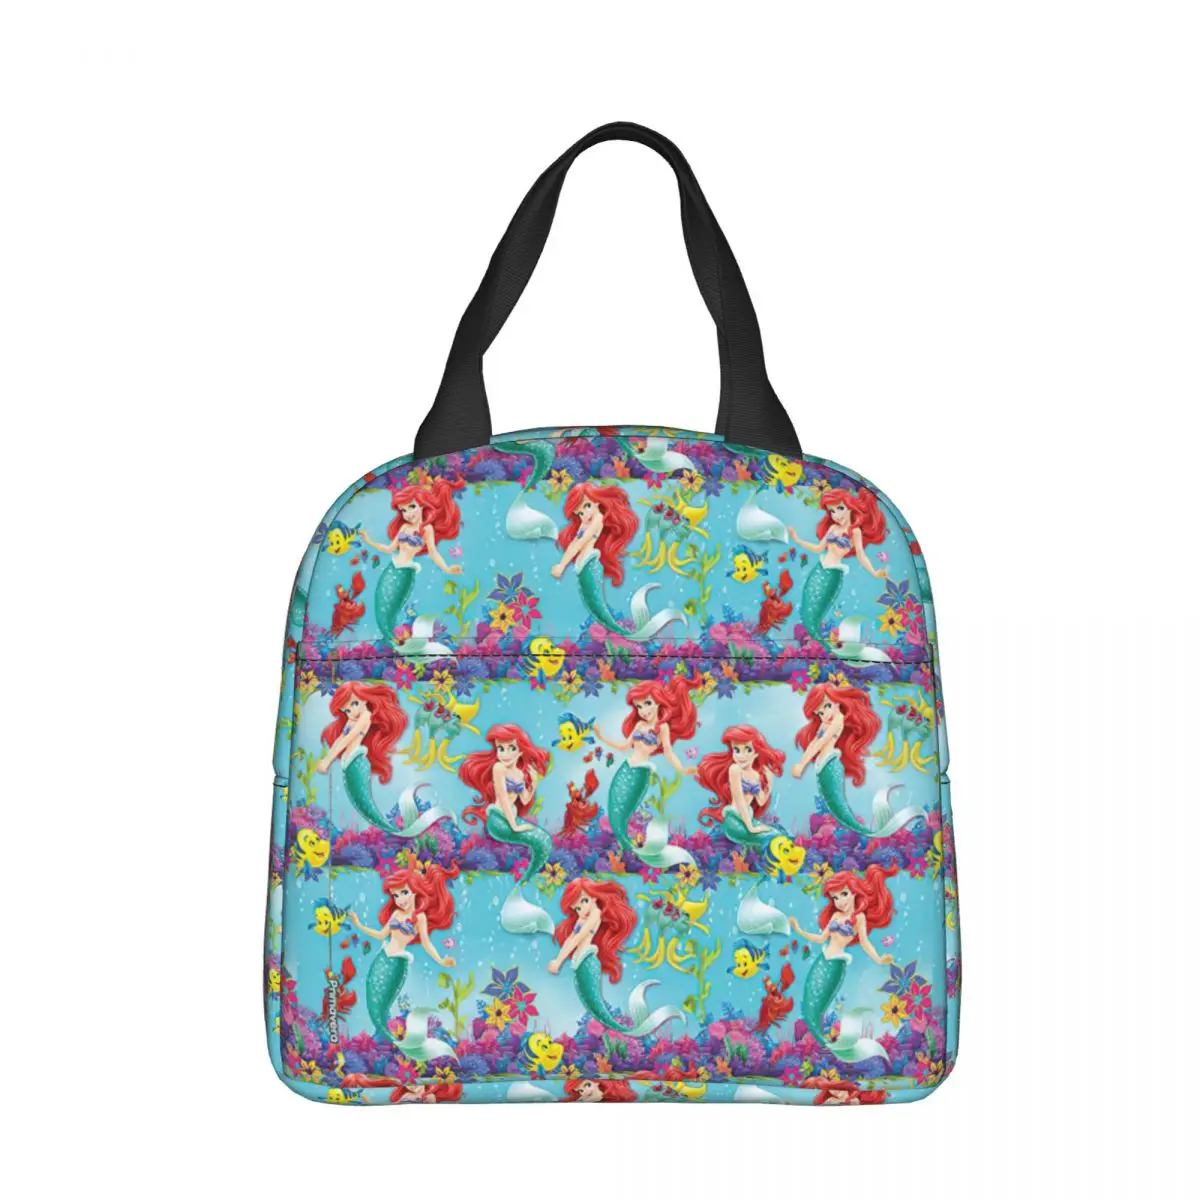 

Disney The Little Mermaid Ariel Princess Insulated Lunch Bag High Capacity Cartoon Meal Container Thermal Bag Tote Lunch Box